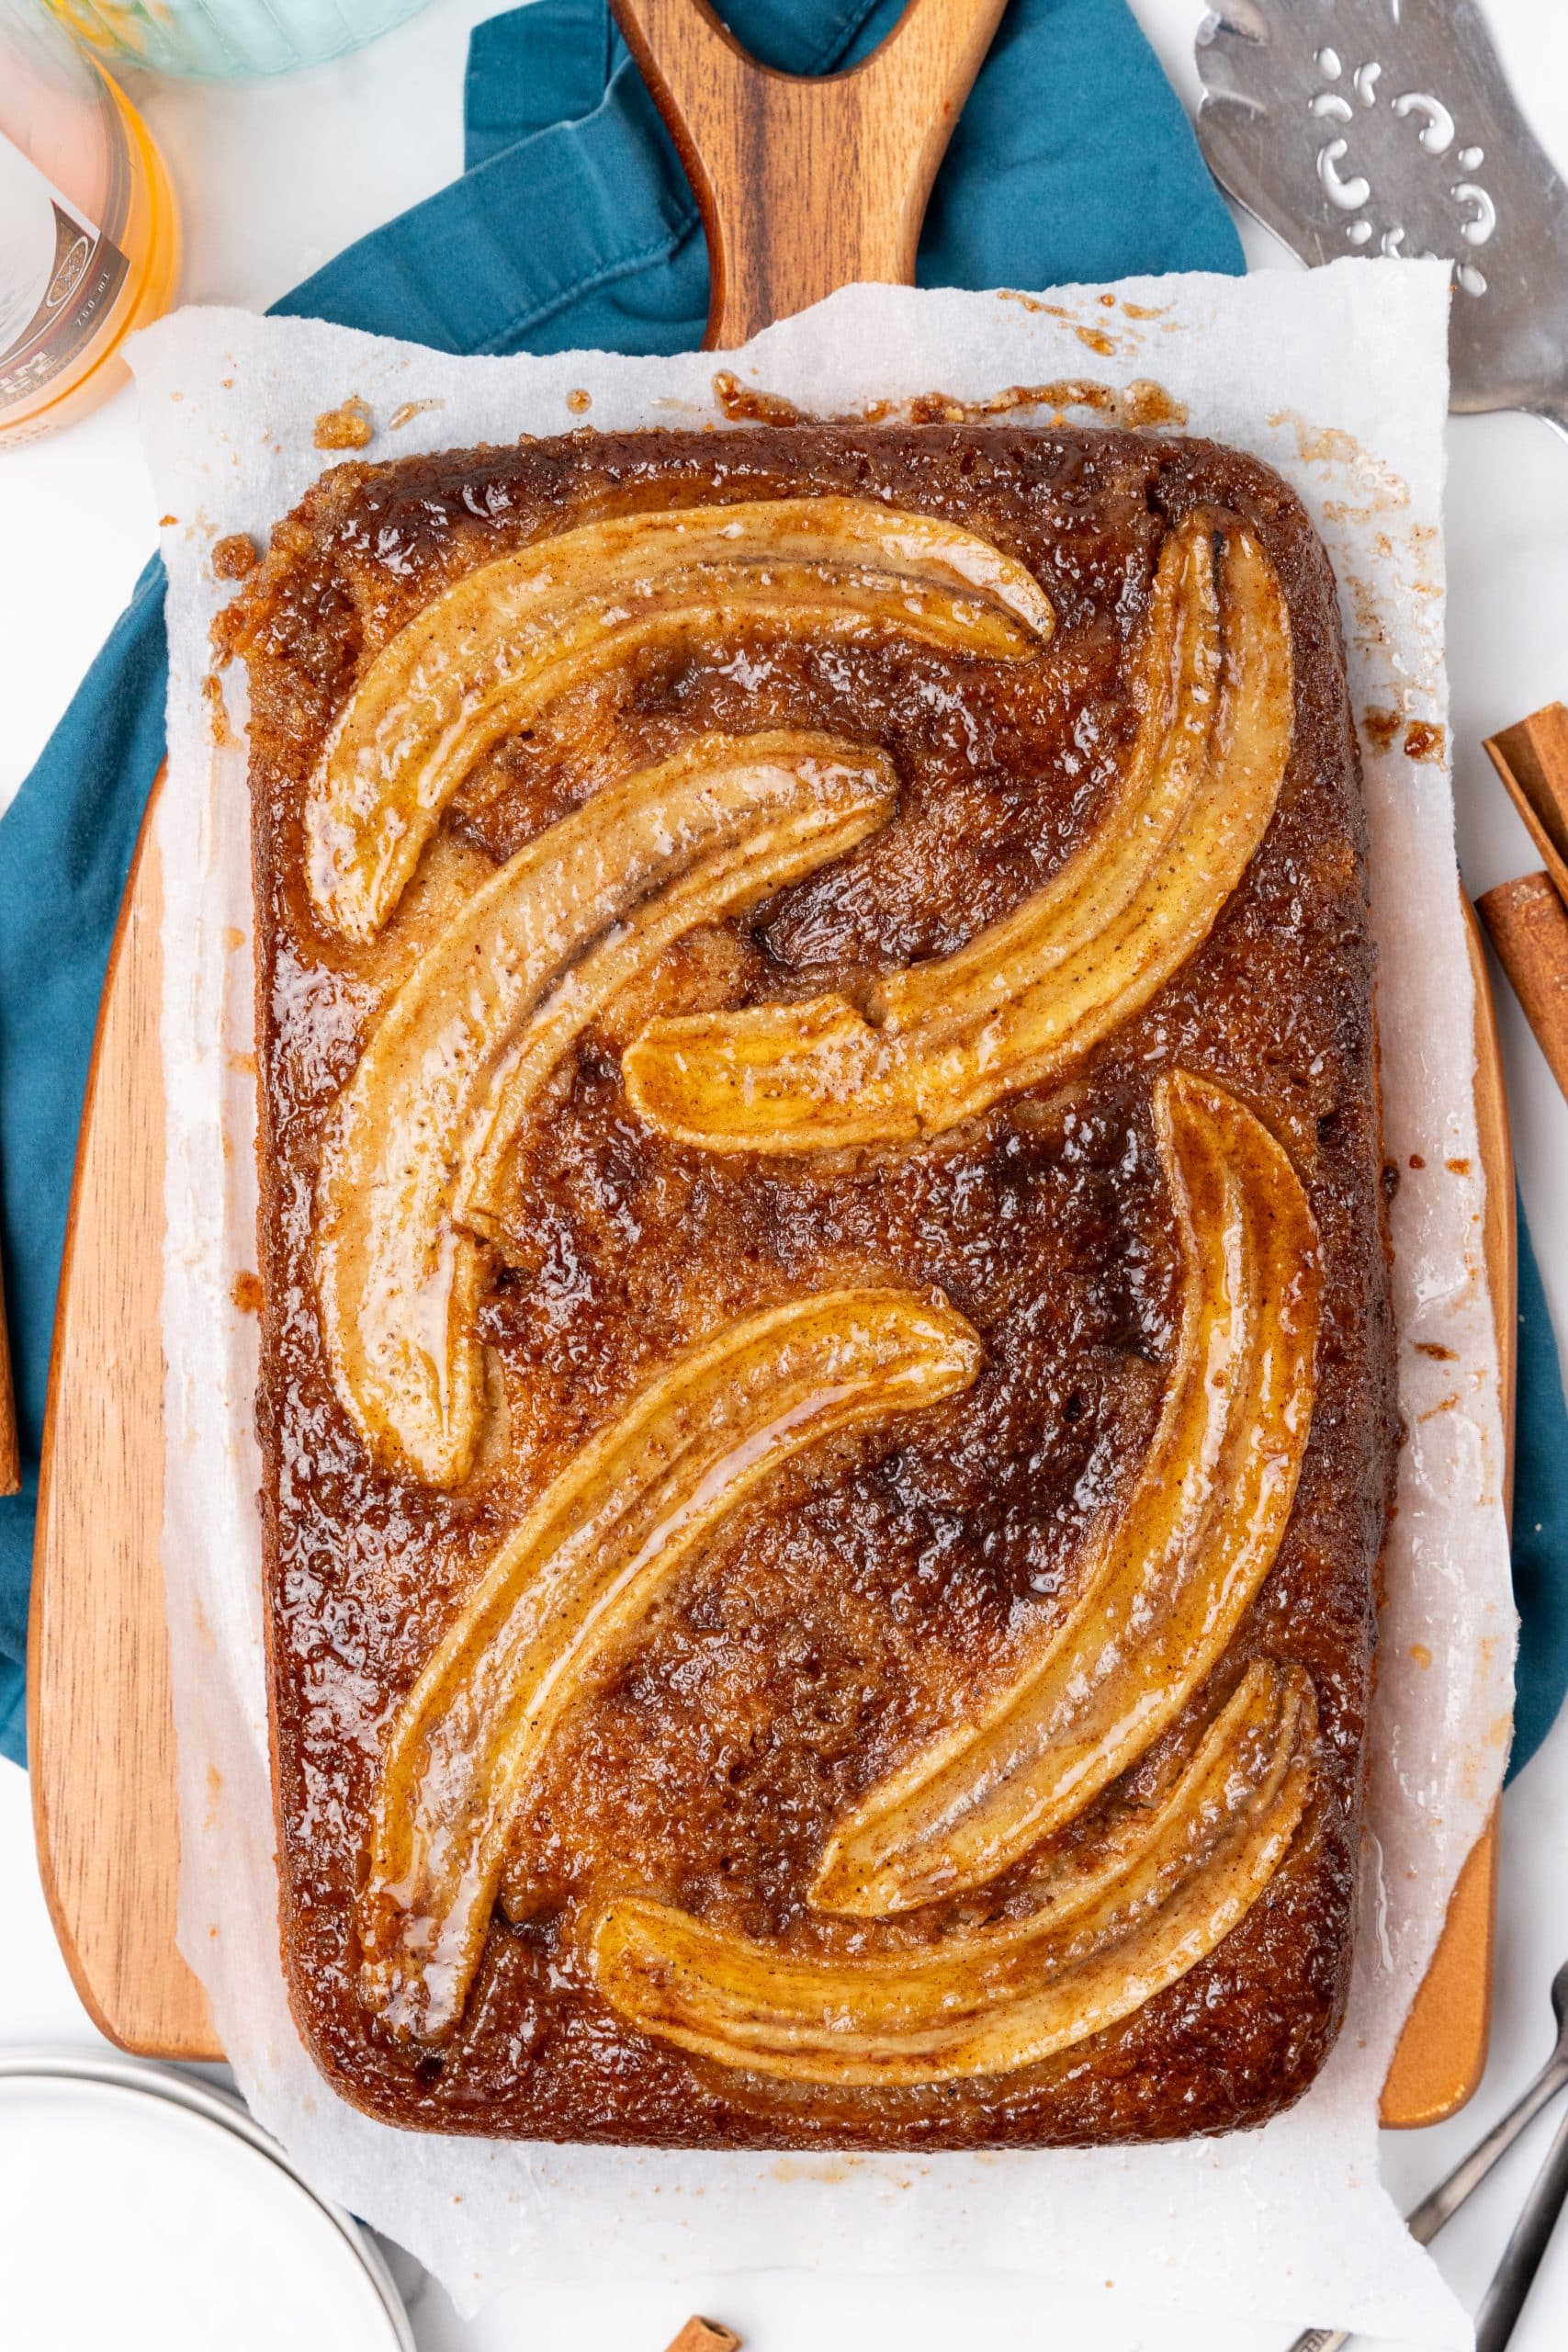 bananas foster upside down cake on a parchment paper lined wooden cutting board